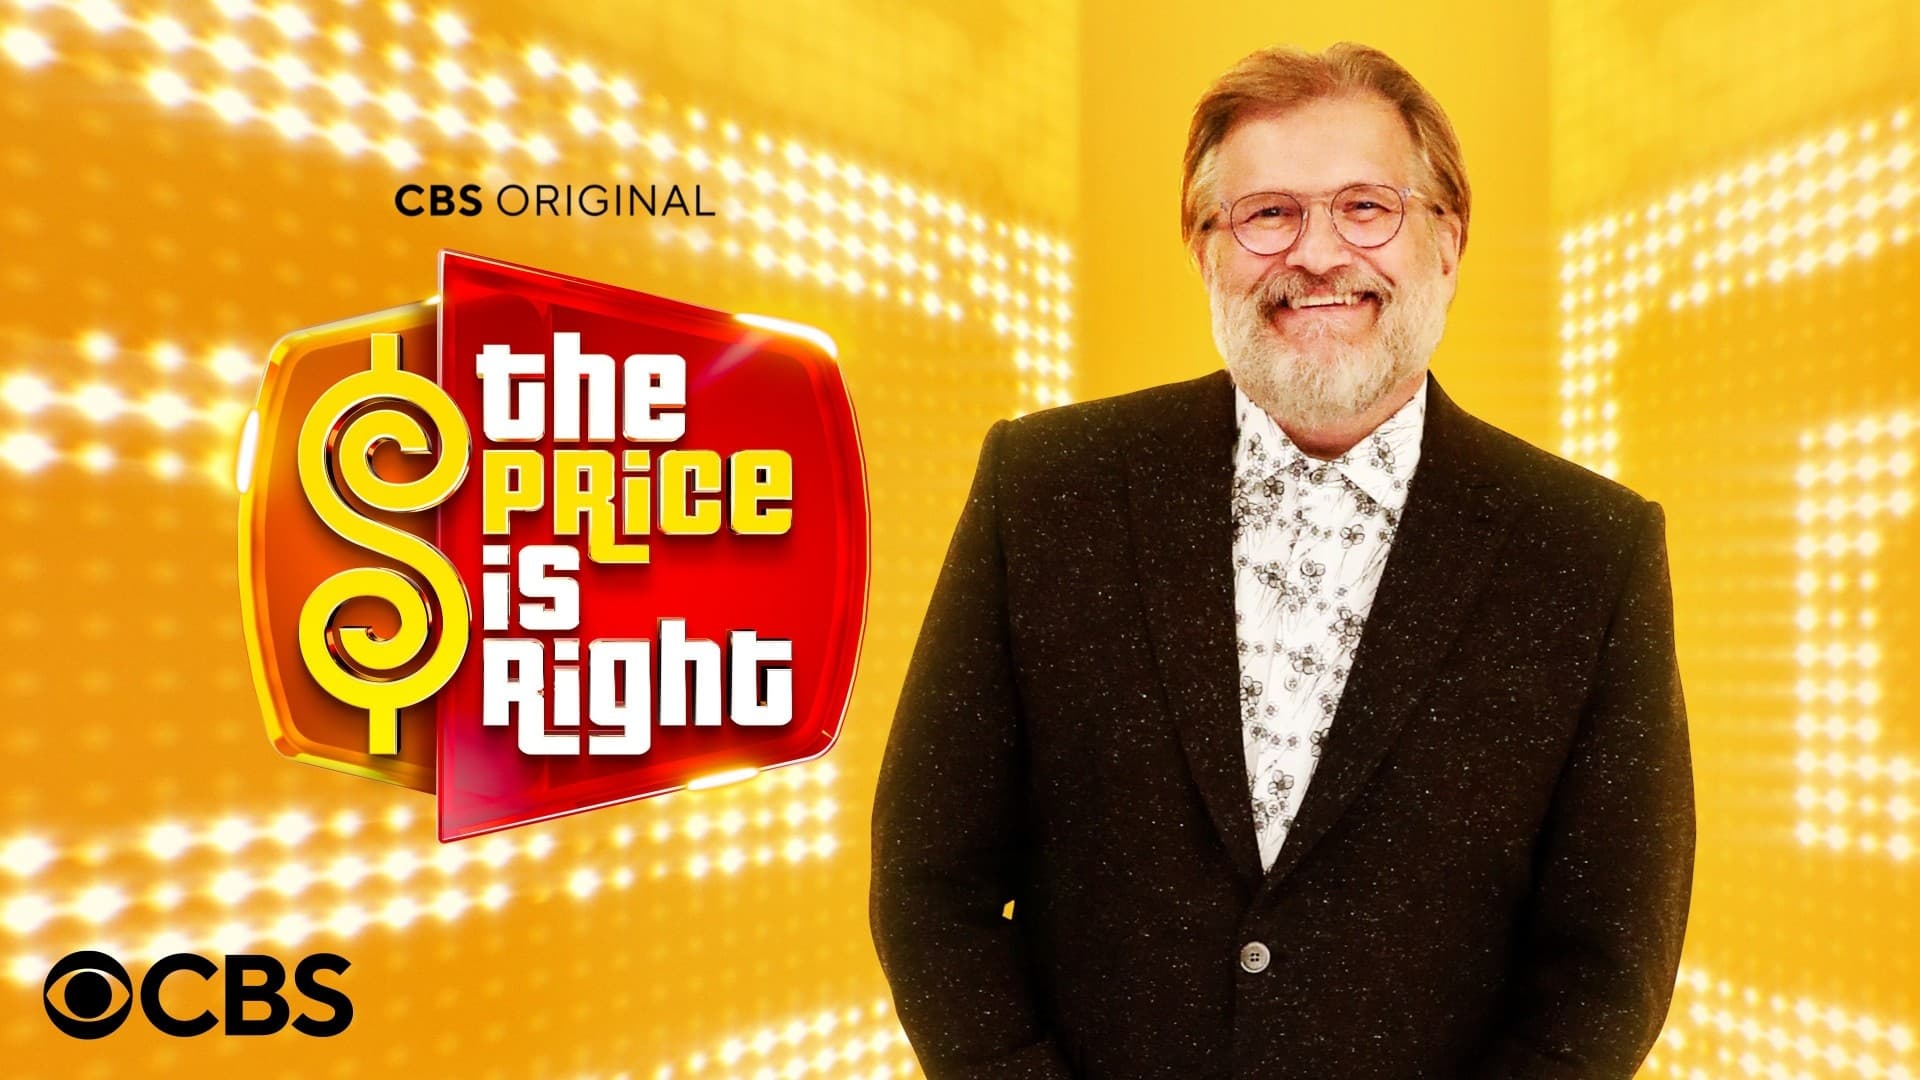 The Price Is Right - Season 6 Episode 20 : The Price Is Right Season 6 Episode 20